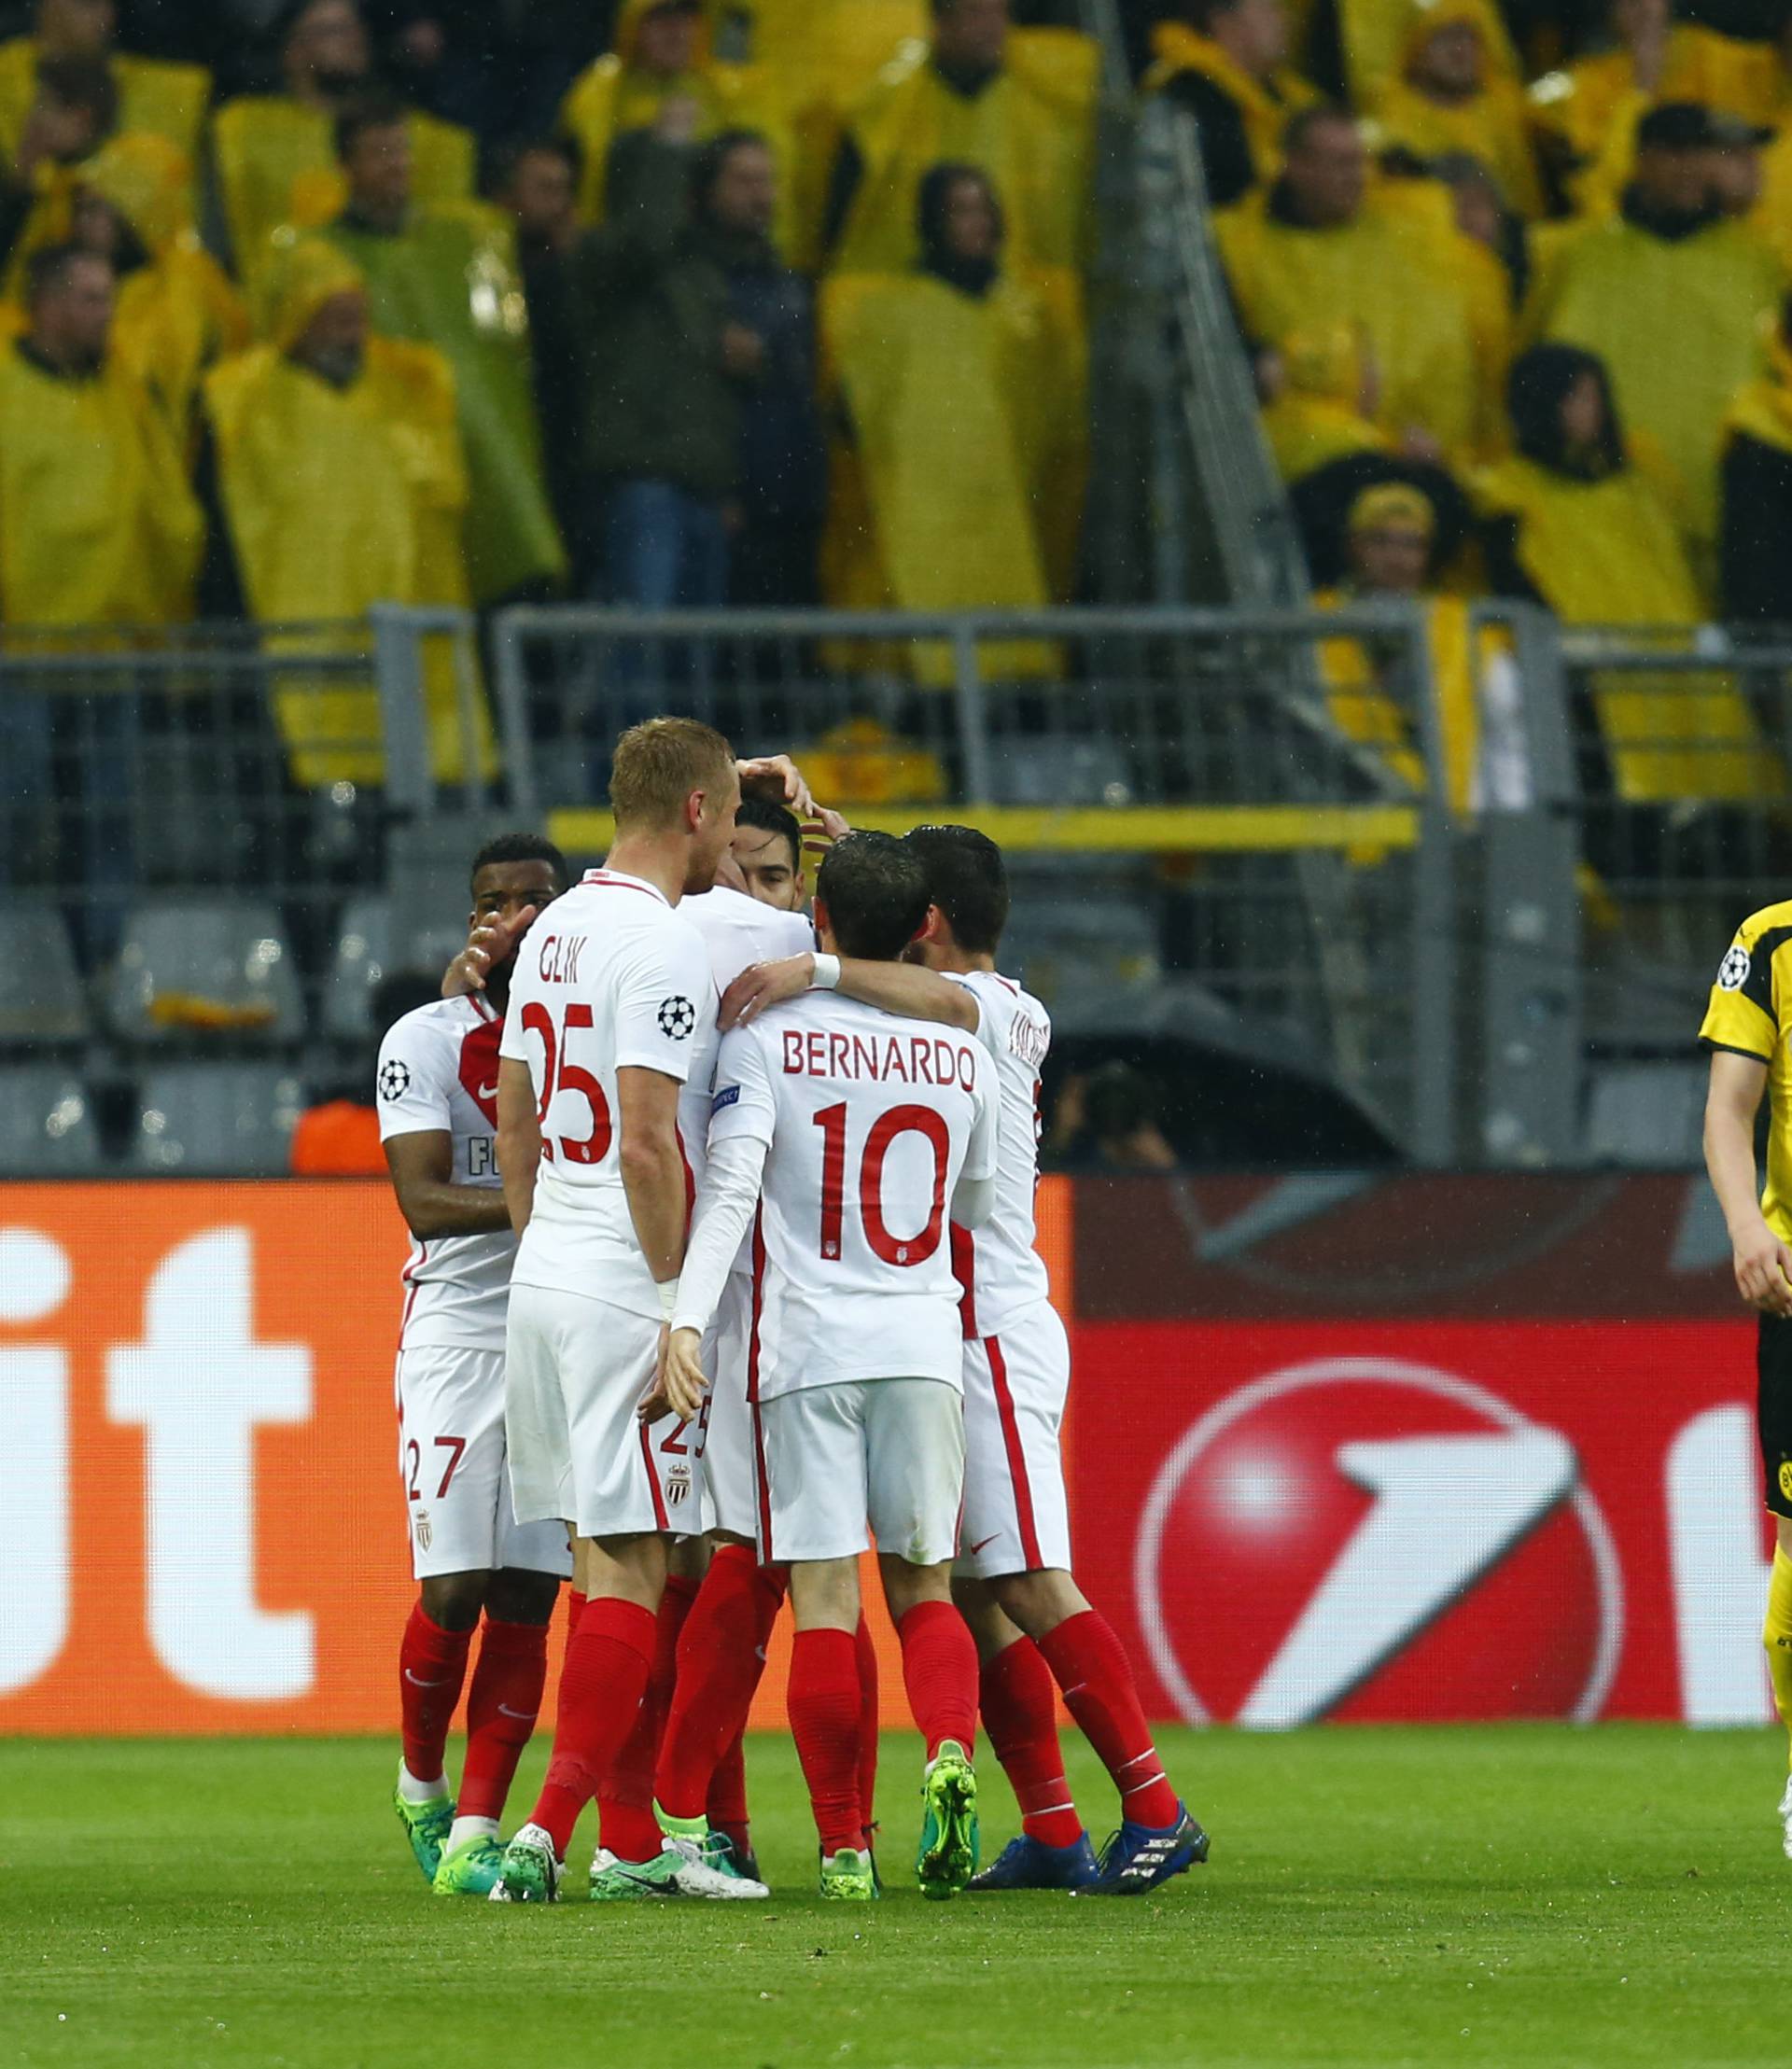 Monaco players celebrate after Borussia Dortmund's Sven Bender scored a own goal and their second as Borussia Dortmund's Matthias Ginter looks dejected